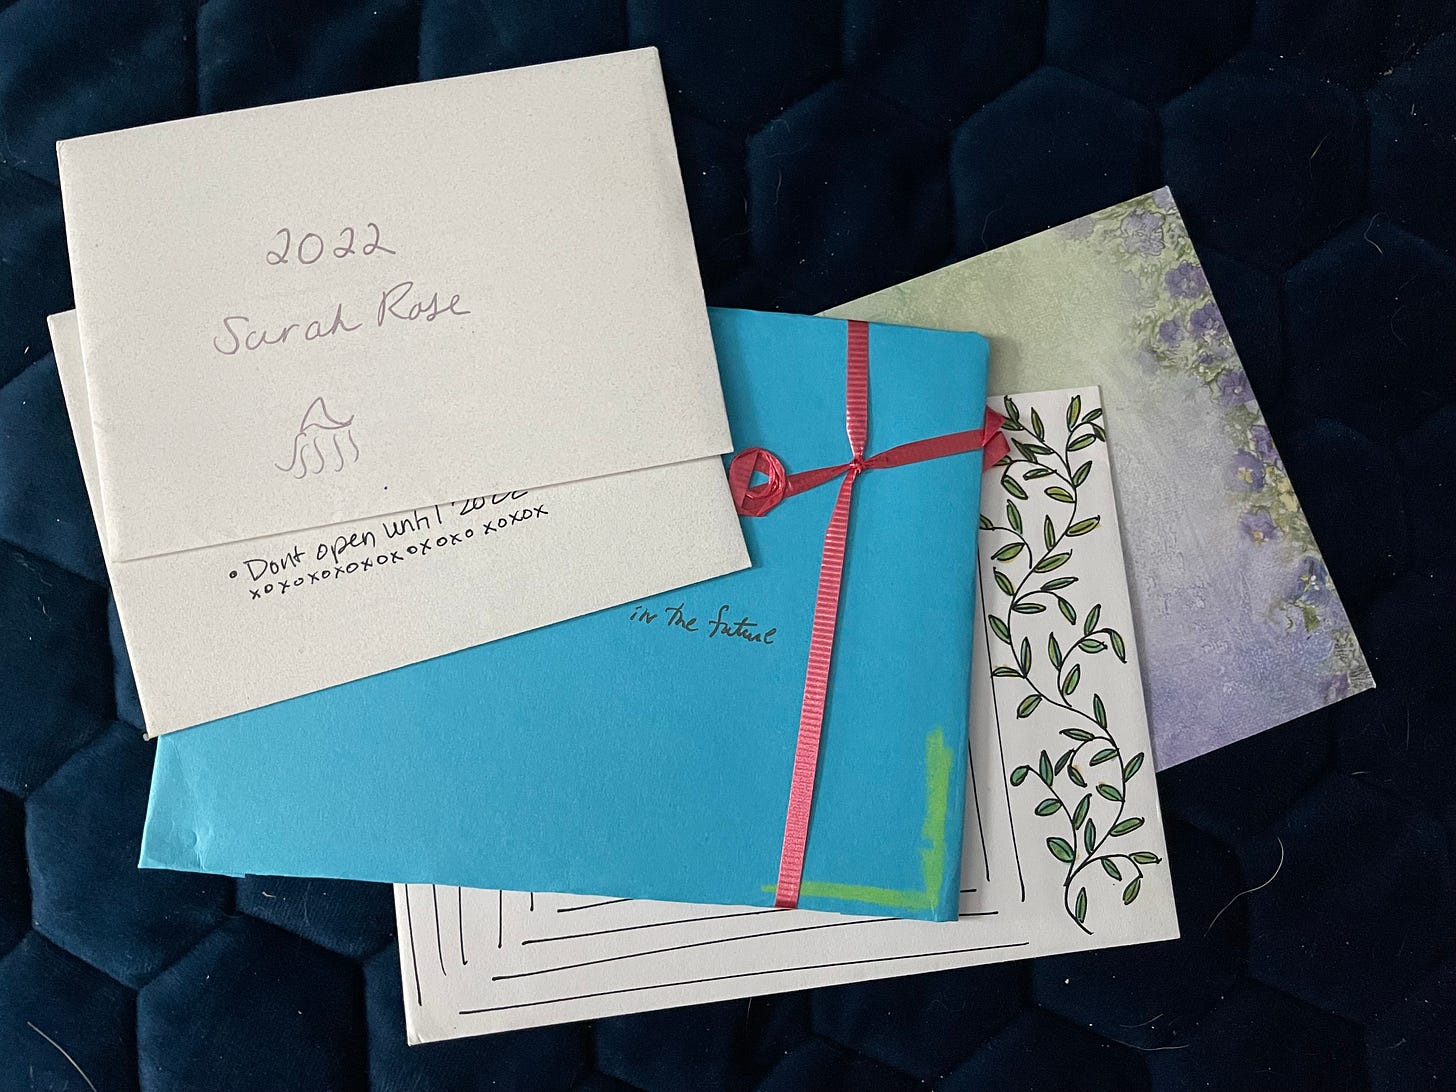 Several cards in envelopes, the top which reads: 2022 Sarah Rose.